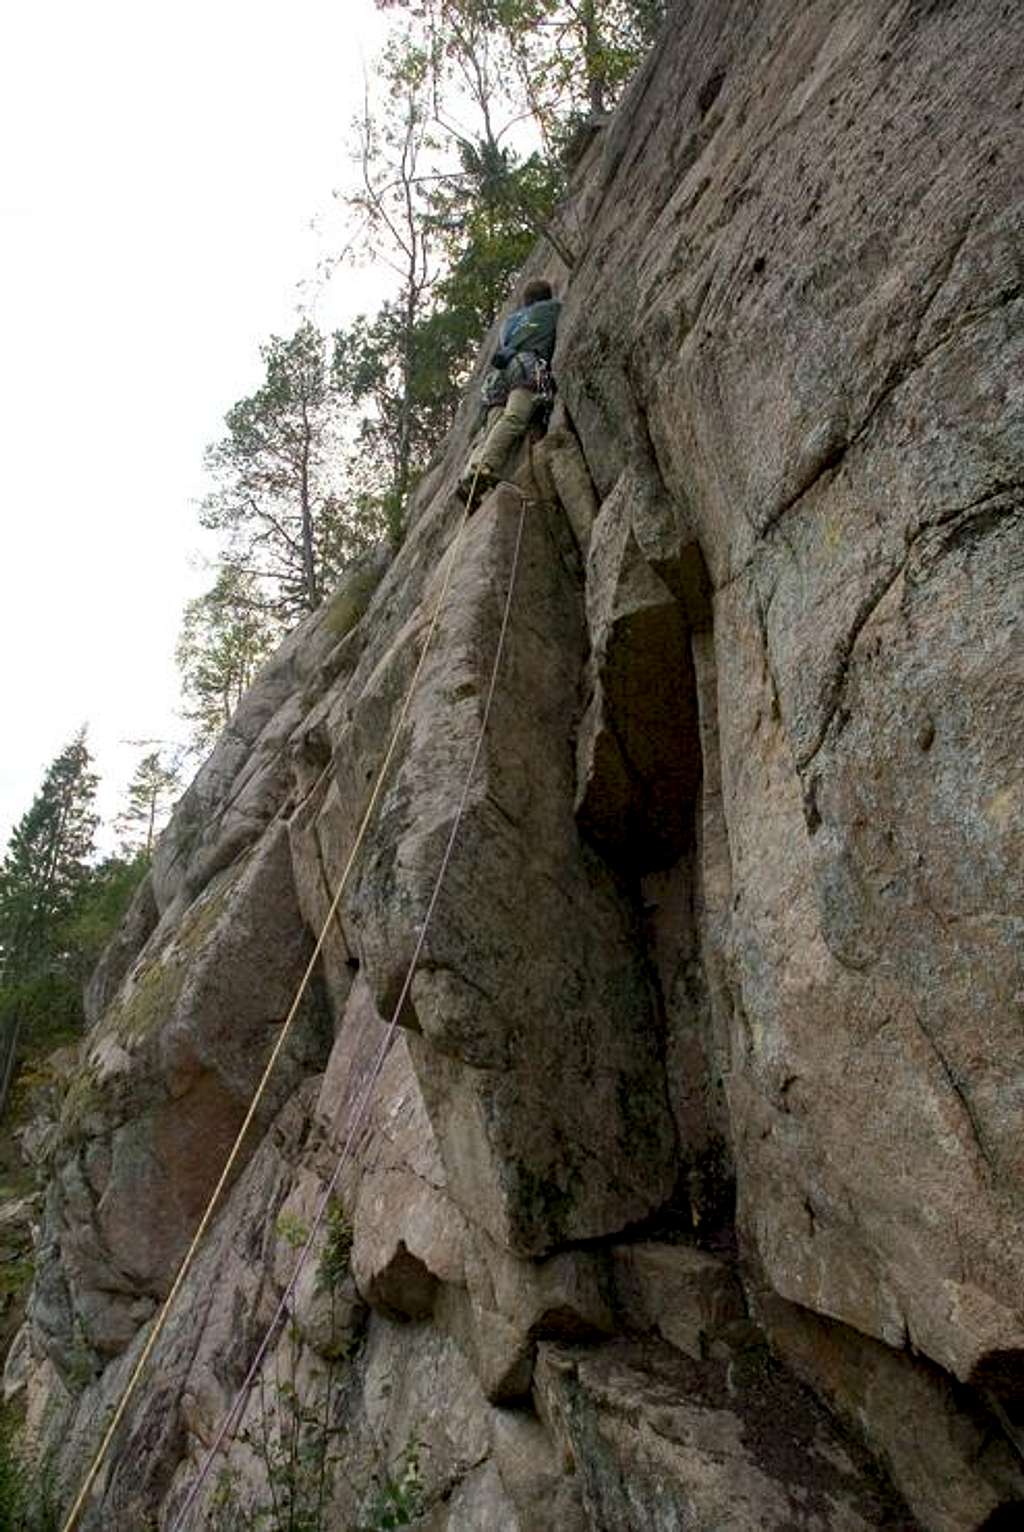 Climbing in Ystehede